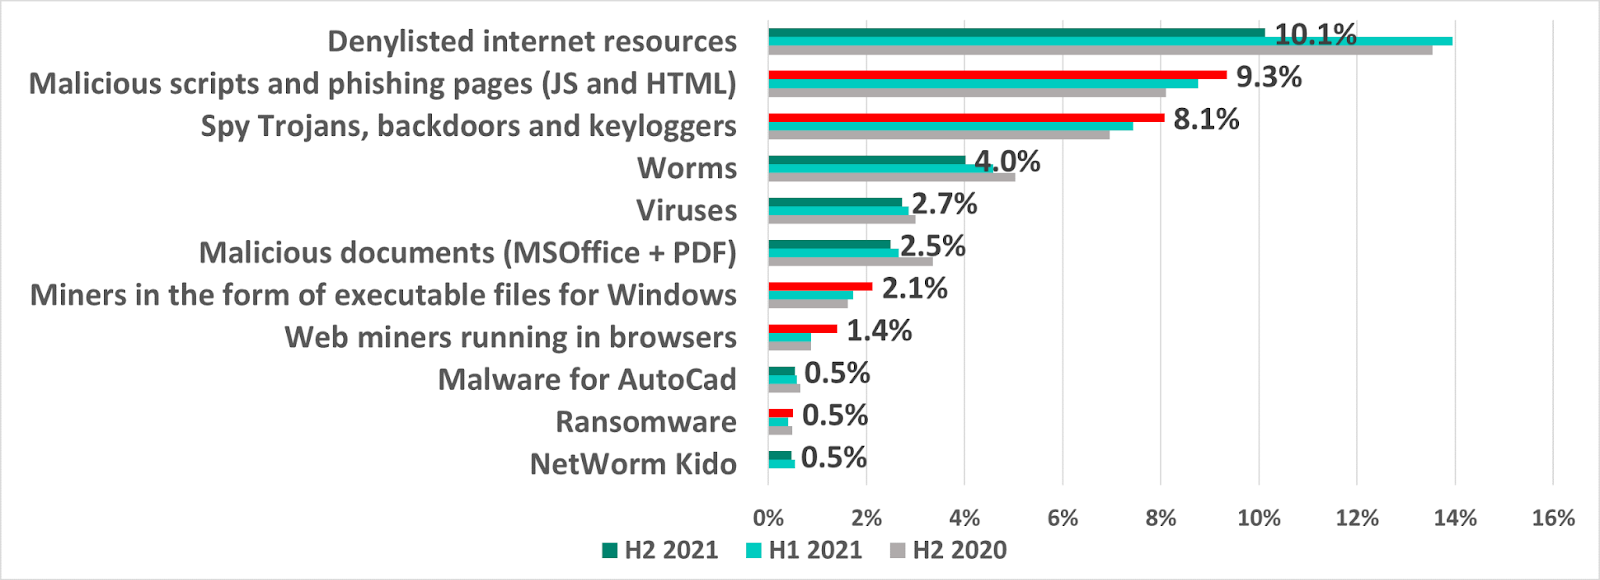 Industrial control systems at risk as the share of computers attacked with miners, spyware, and malicious scripts on the rise in H2 2021 1